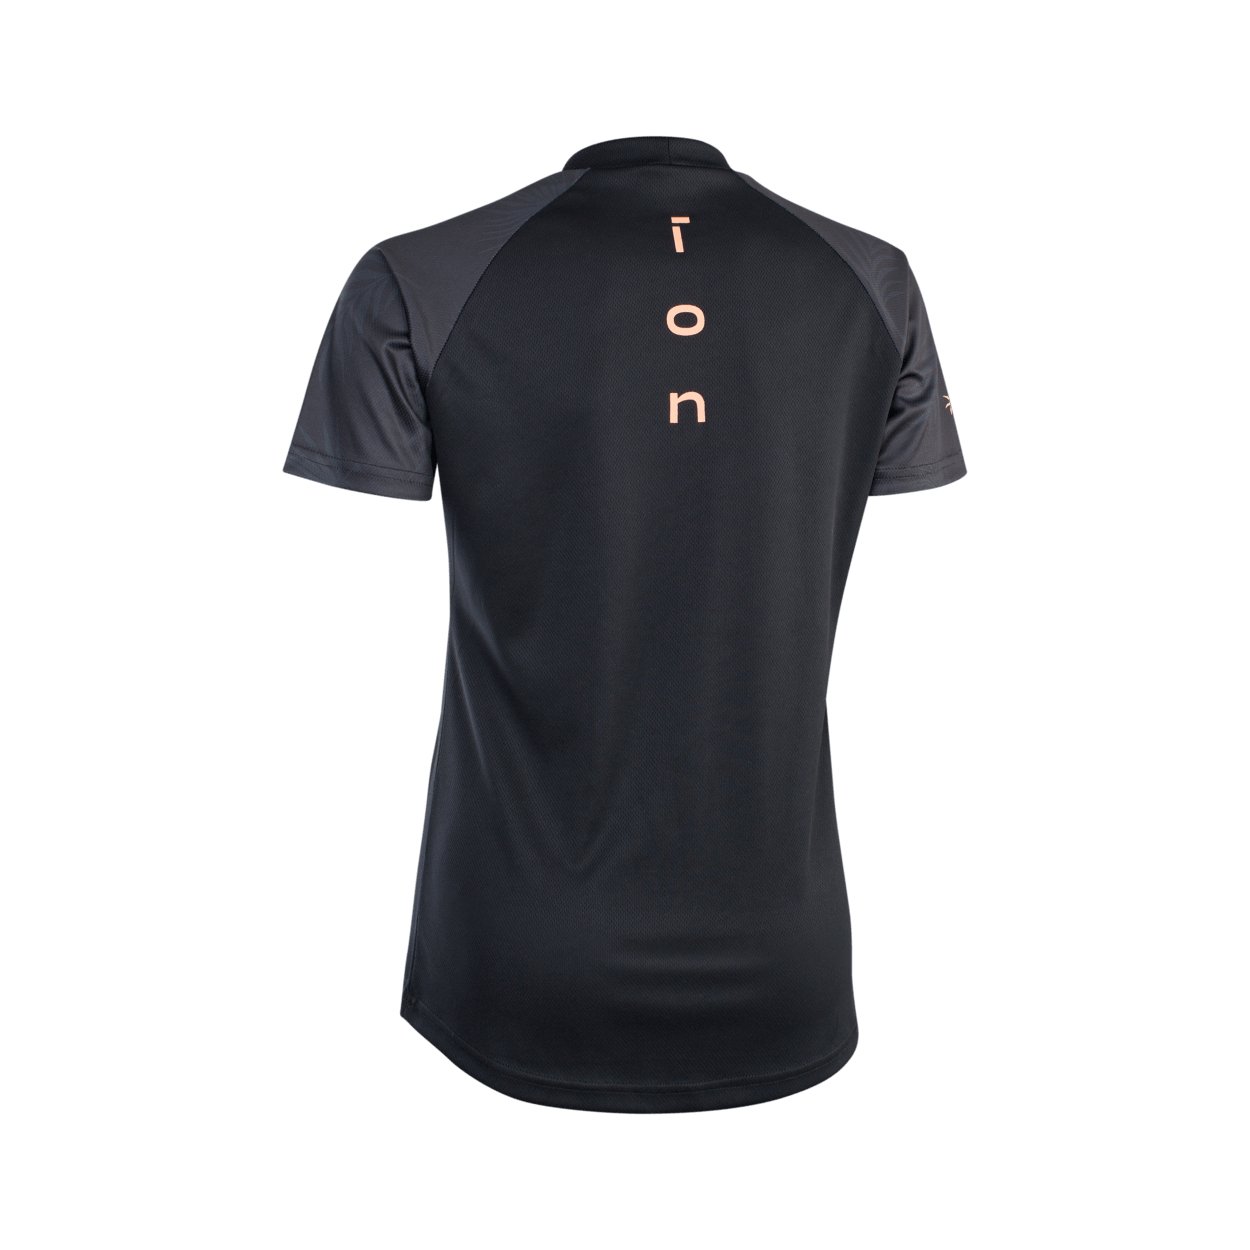 ION Wetshirt SS women 2022 - Worthing Watersports - 9010583051598 - Tops - ION Water